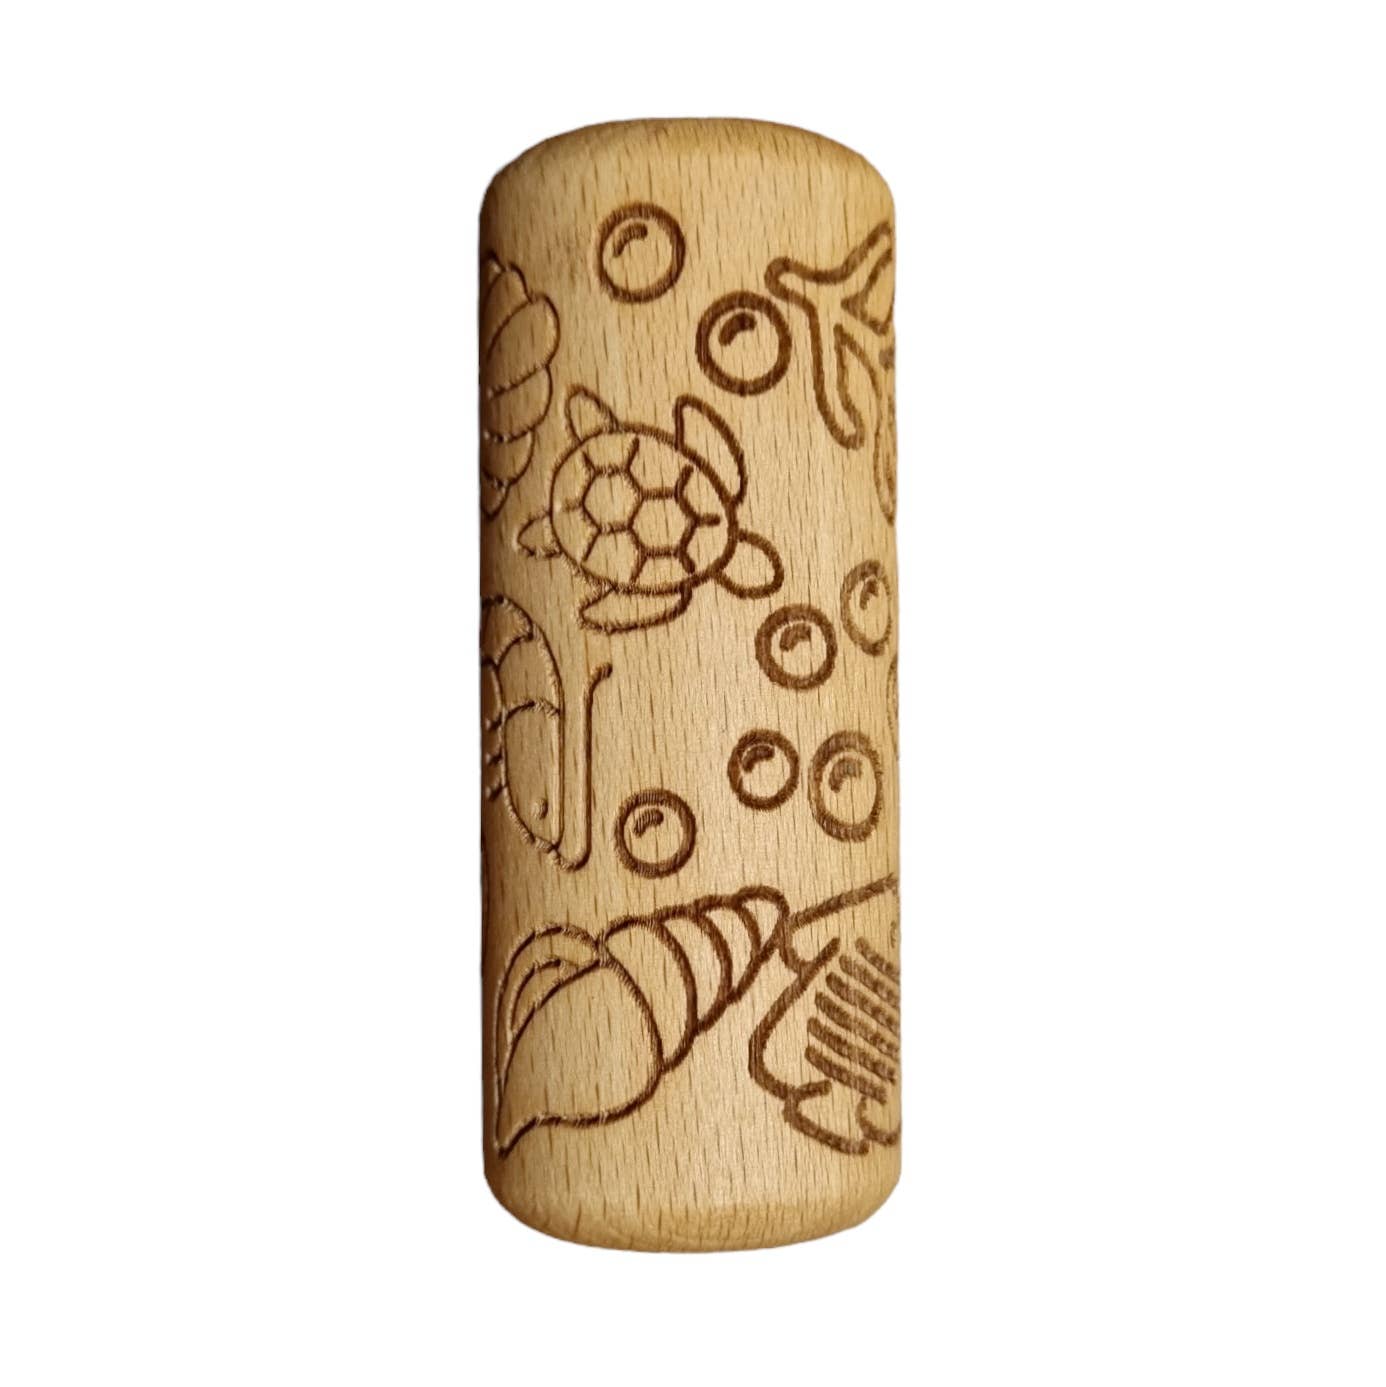 Marine Animal Wooden Roller, The Embossed Clay Roller is a fantastic tool for unleashing your creativity and exploring the joys of pottery! This wooden roller is adorned with delightful designs that bring a fascinating underwater world to life in your hand. You can use it to roll out clay and create a range of intricate textures and patterns that will enhance your artwork and make it truly unique. The roller is lightweight and easy to handle, making it ideal for children and adults alike. It's perfect for o